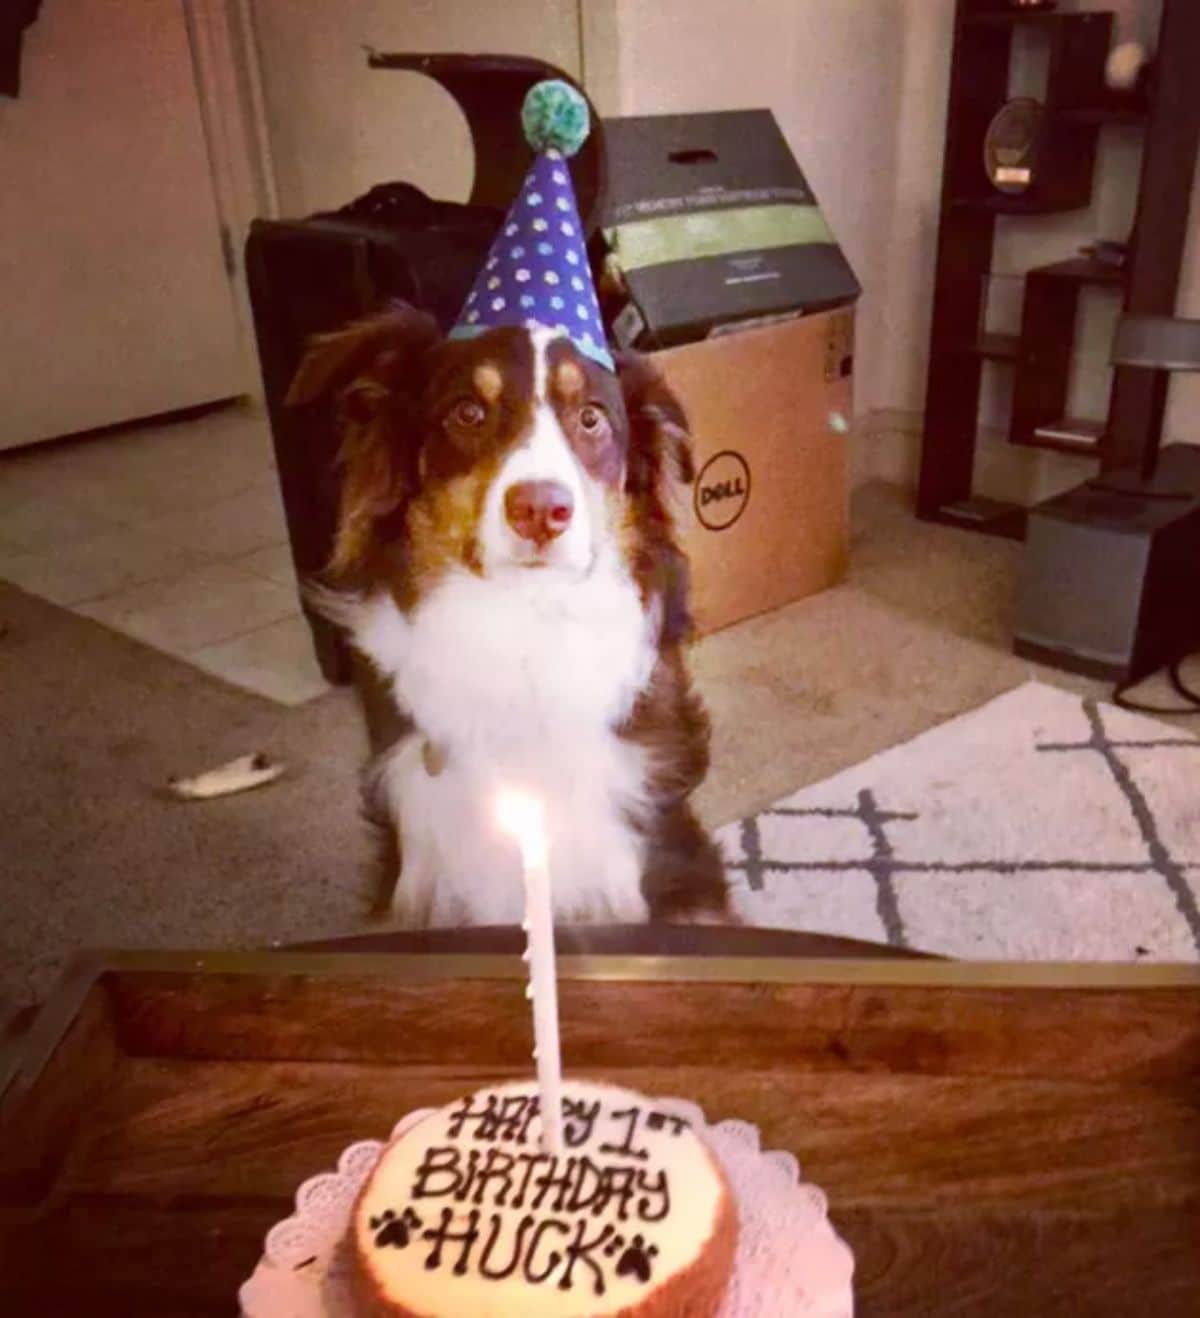 fluffy white brown and black dog wearing a blue and white party hat and sitting in front of a birthday cake